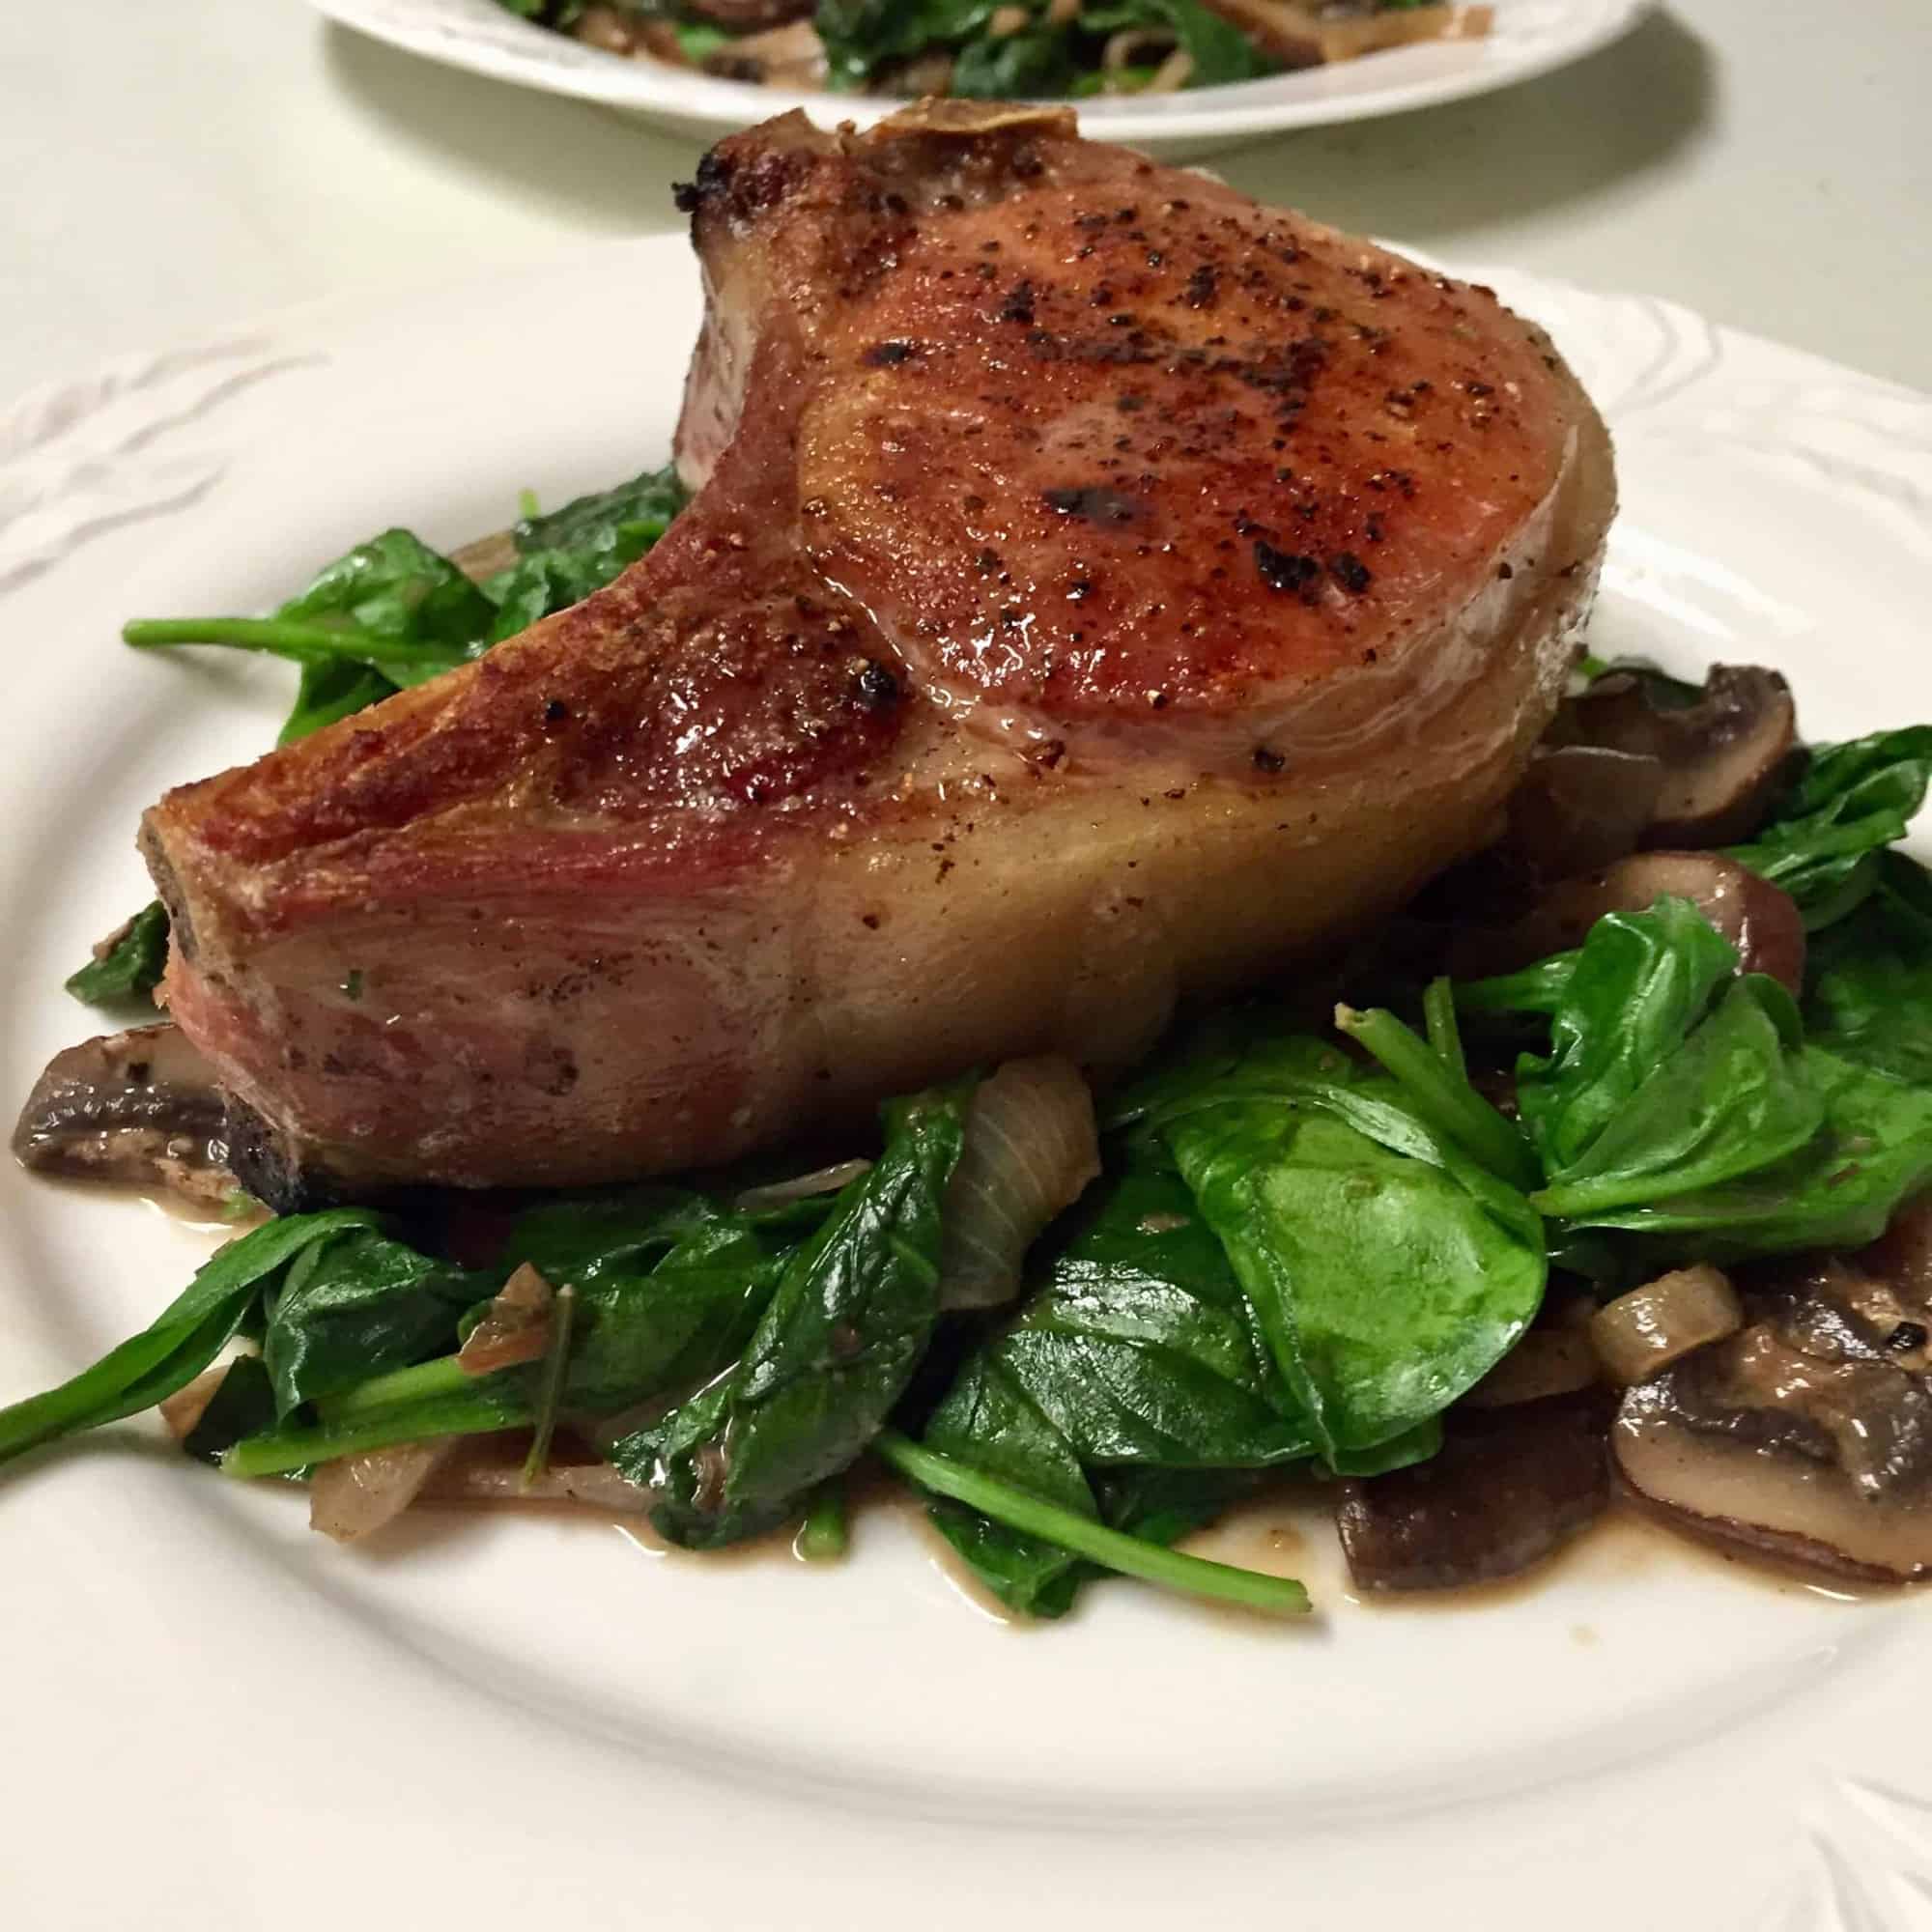 Thick Cut Pork Chops with Mushrooms, Shallots and Spinach